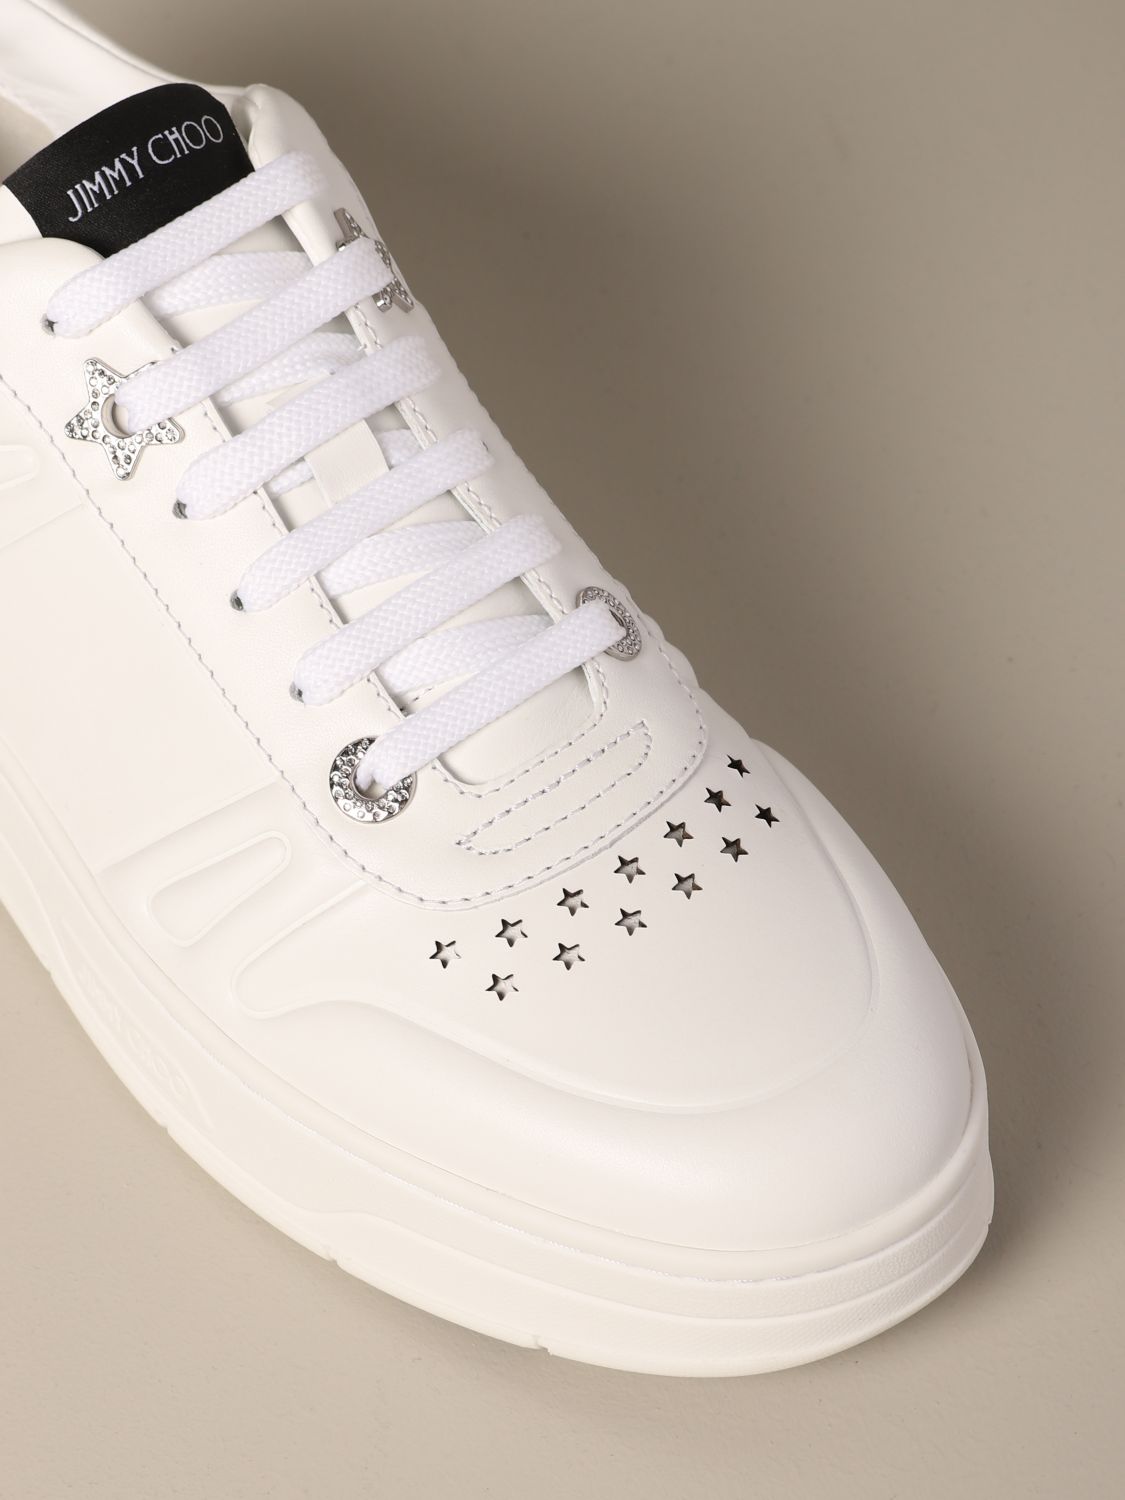 Hawaii Jimmy Choo leather sneakers with stars